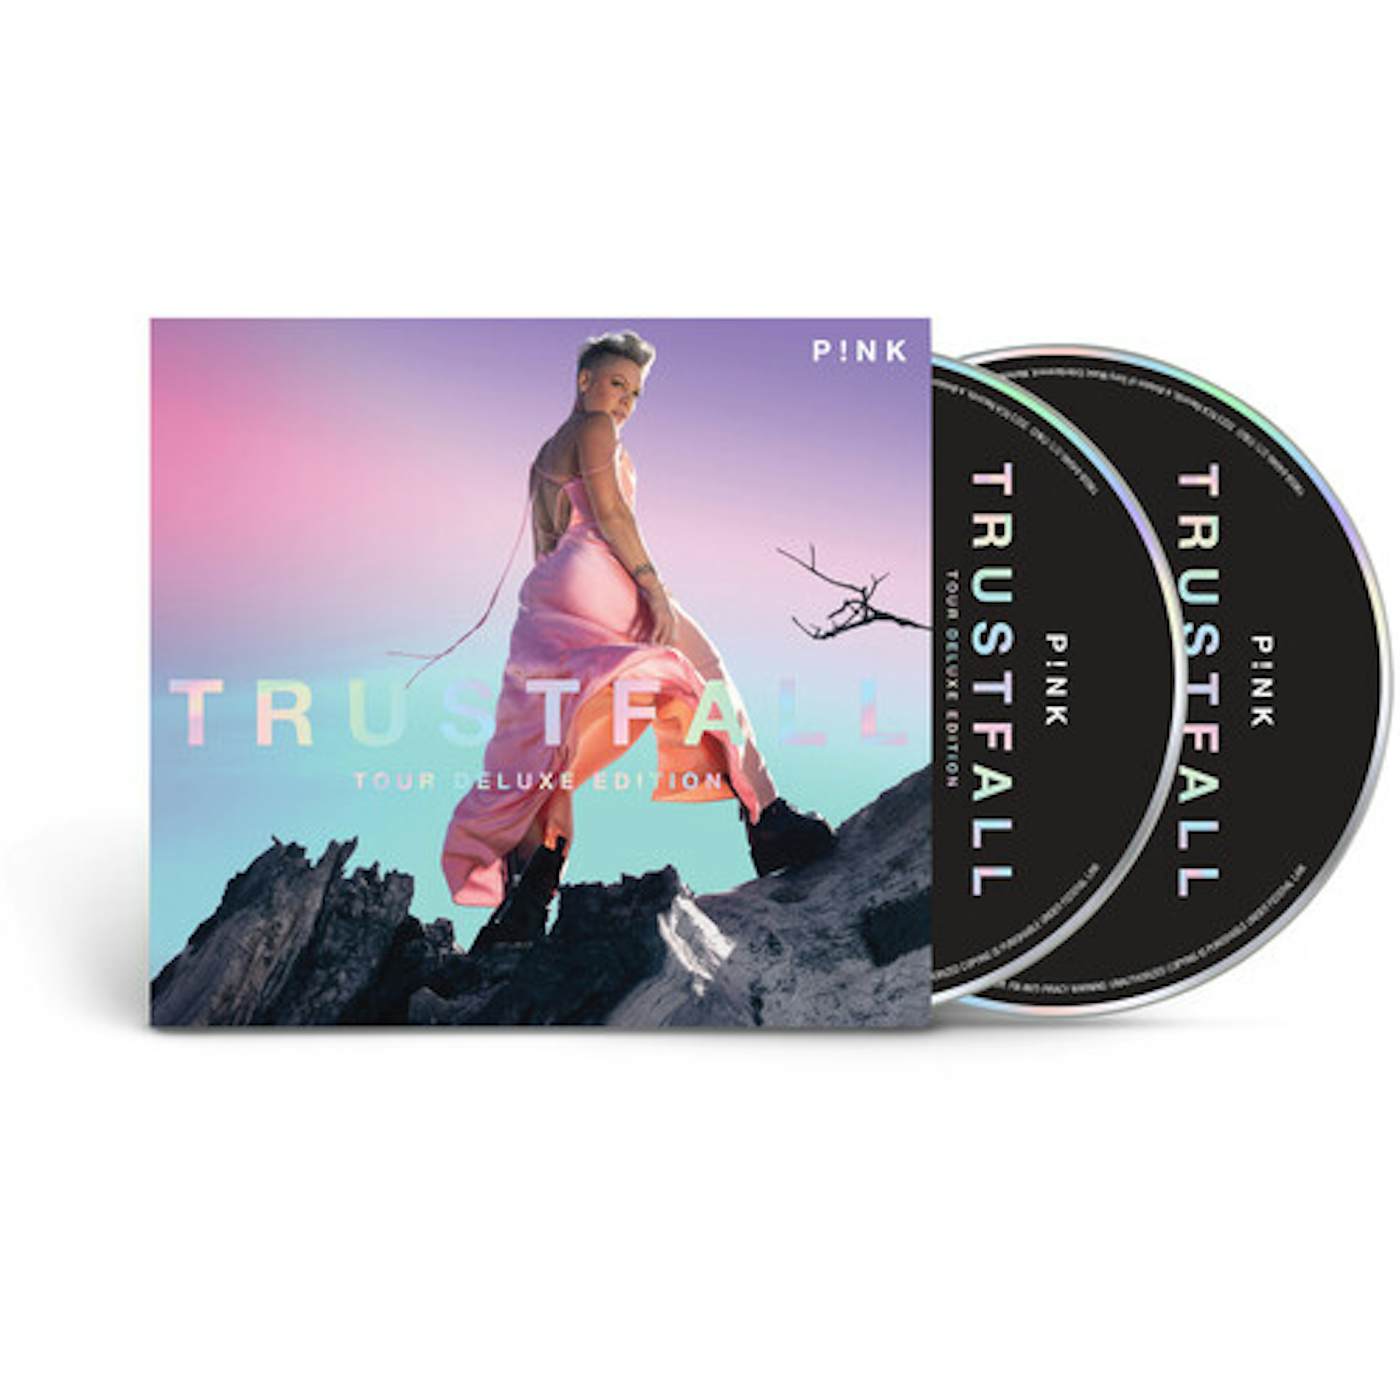 P!nk TRUSTFALL - TOUR DELUXE EDITION CD